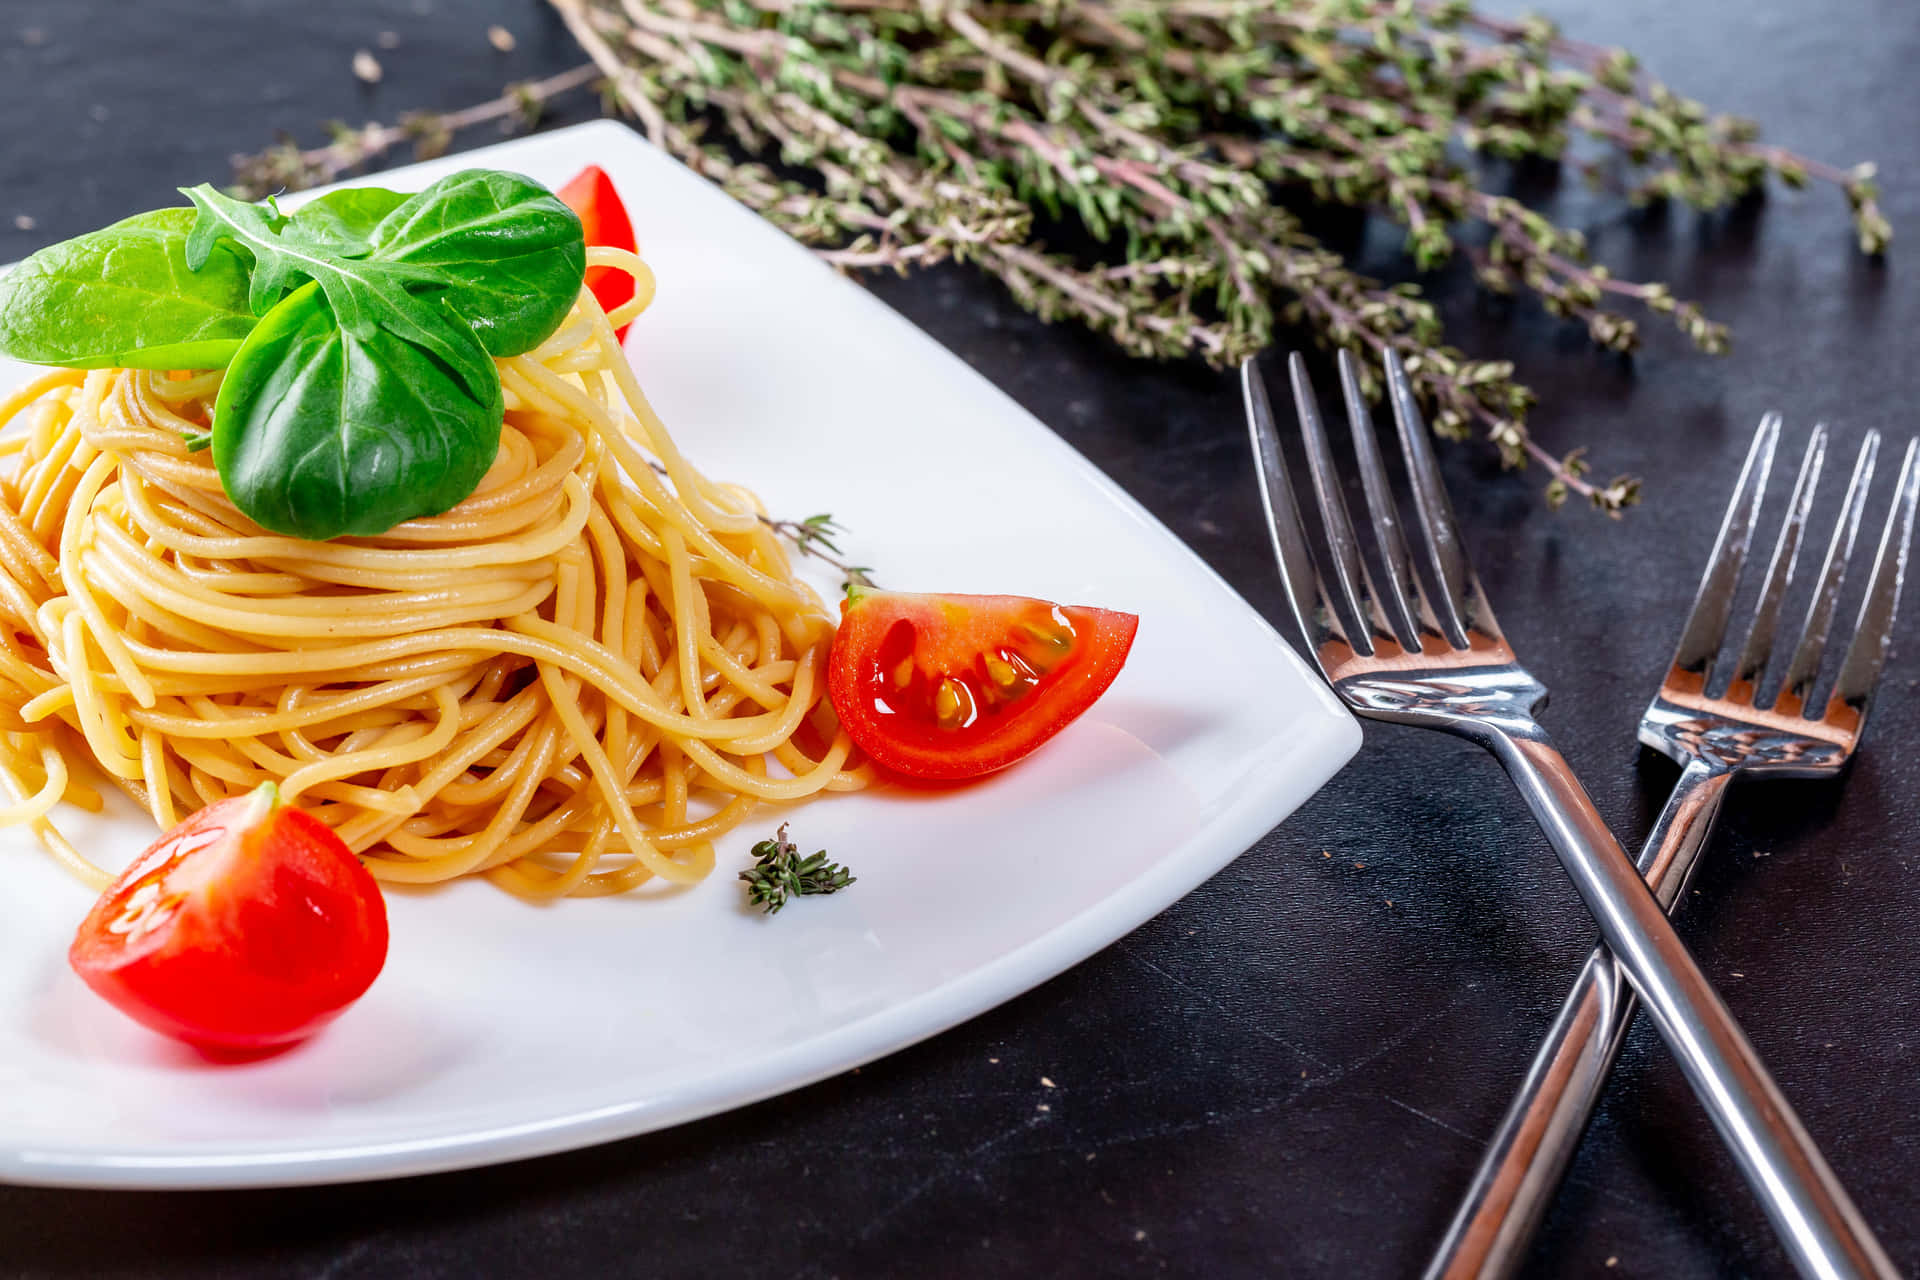 4K Pasta: Enjoy the Authentic Taste and Texture of Italy